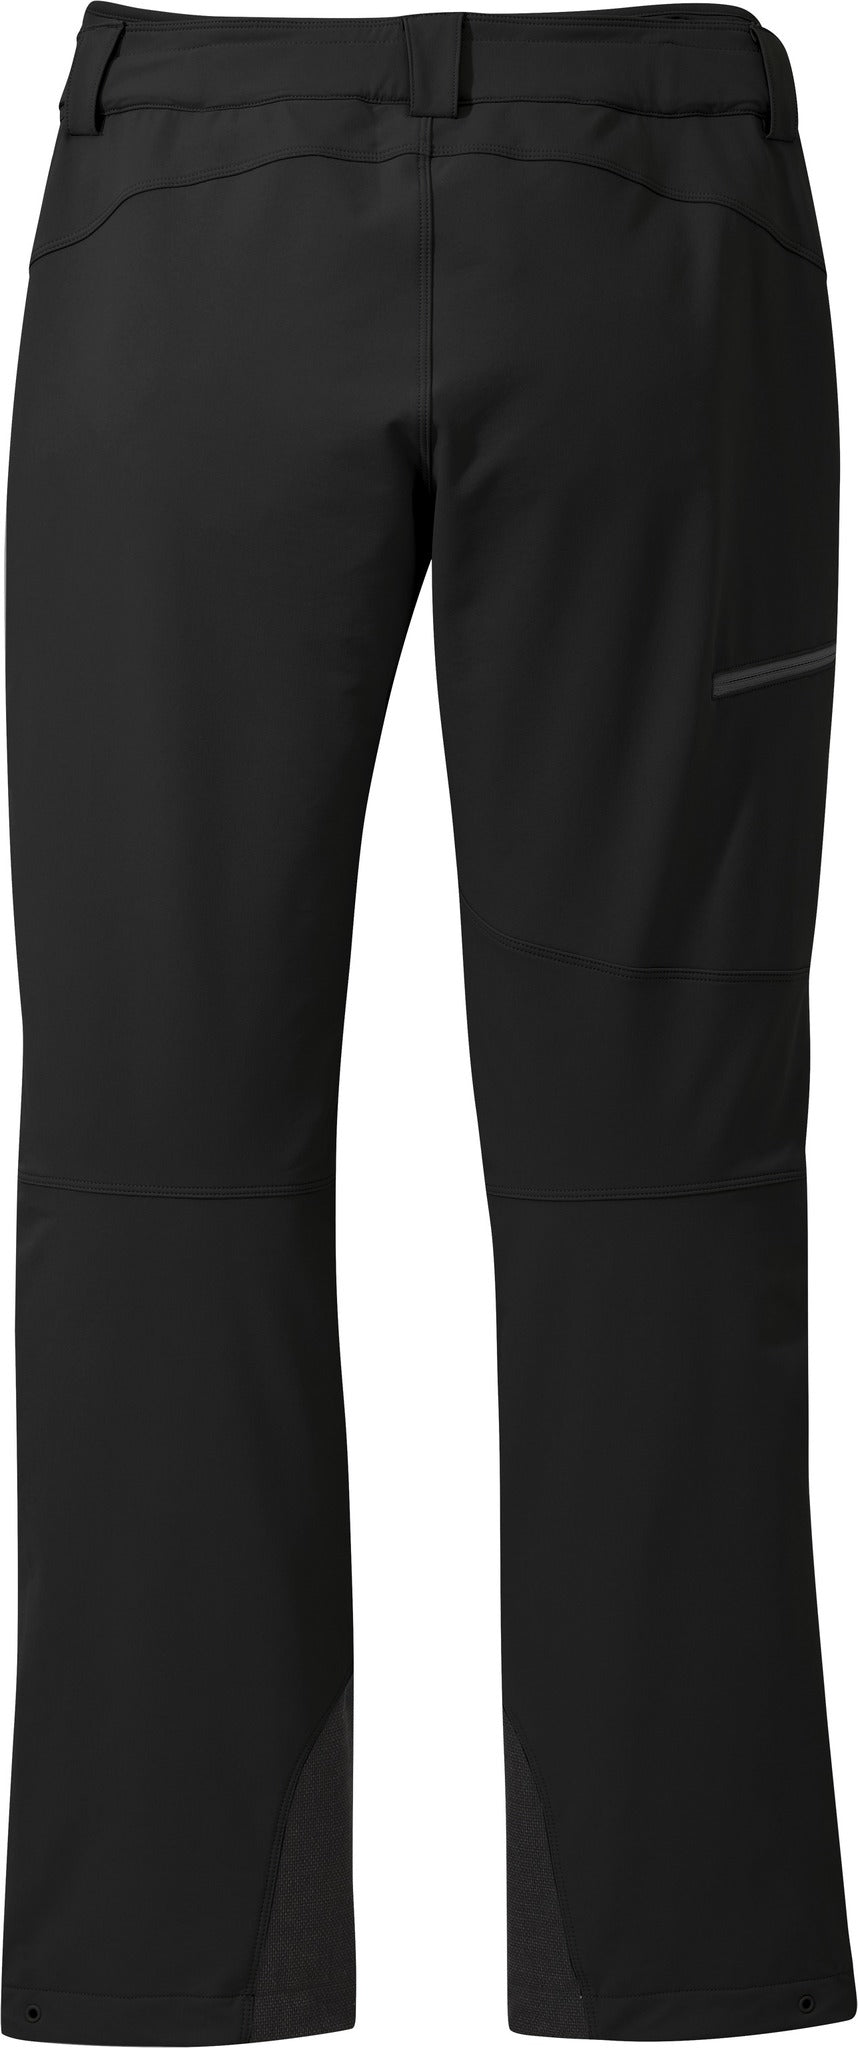 Lole Women Pants Pull On Extra Small Outdoor Hiking 29 Inseam